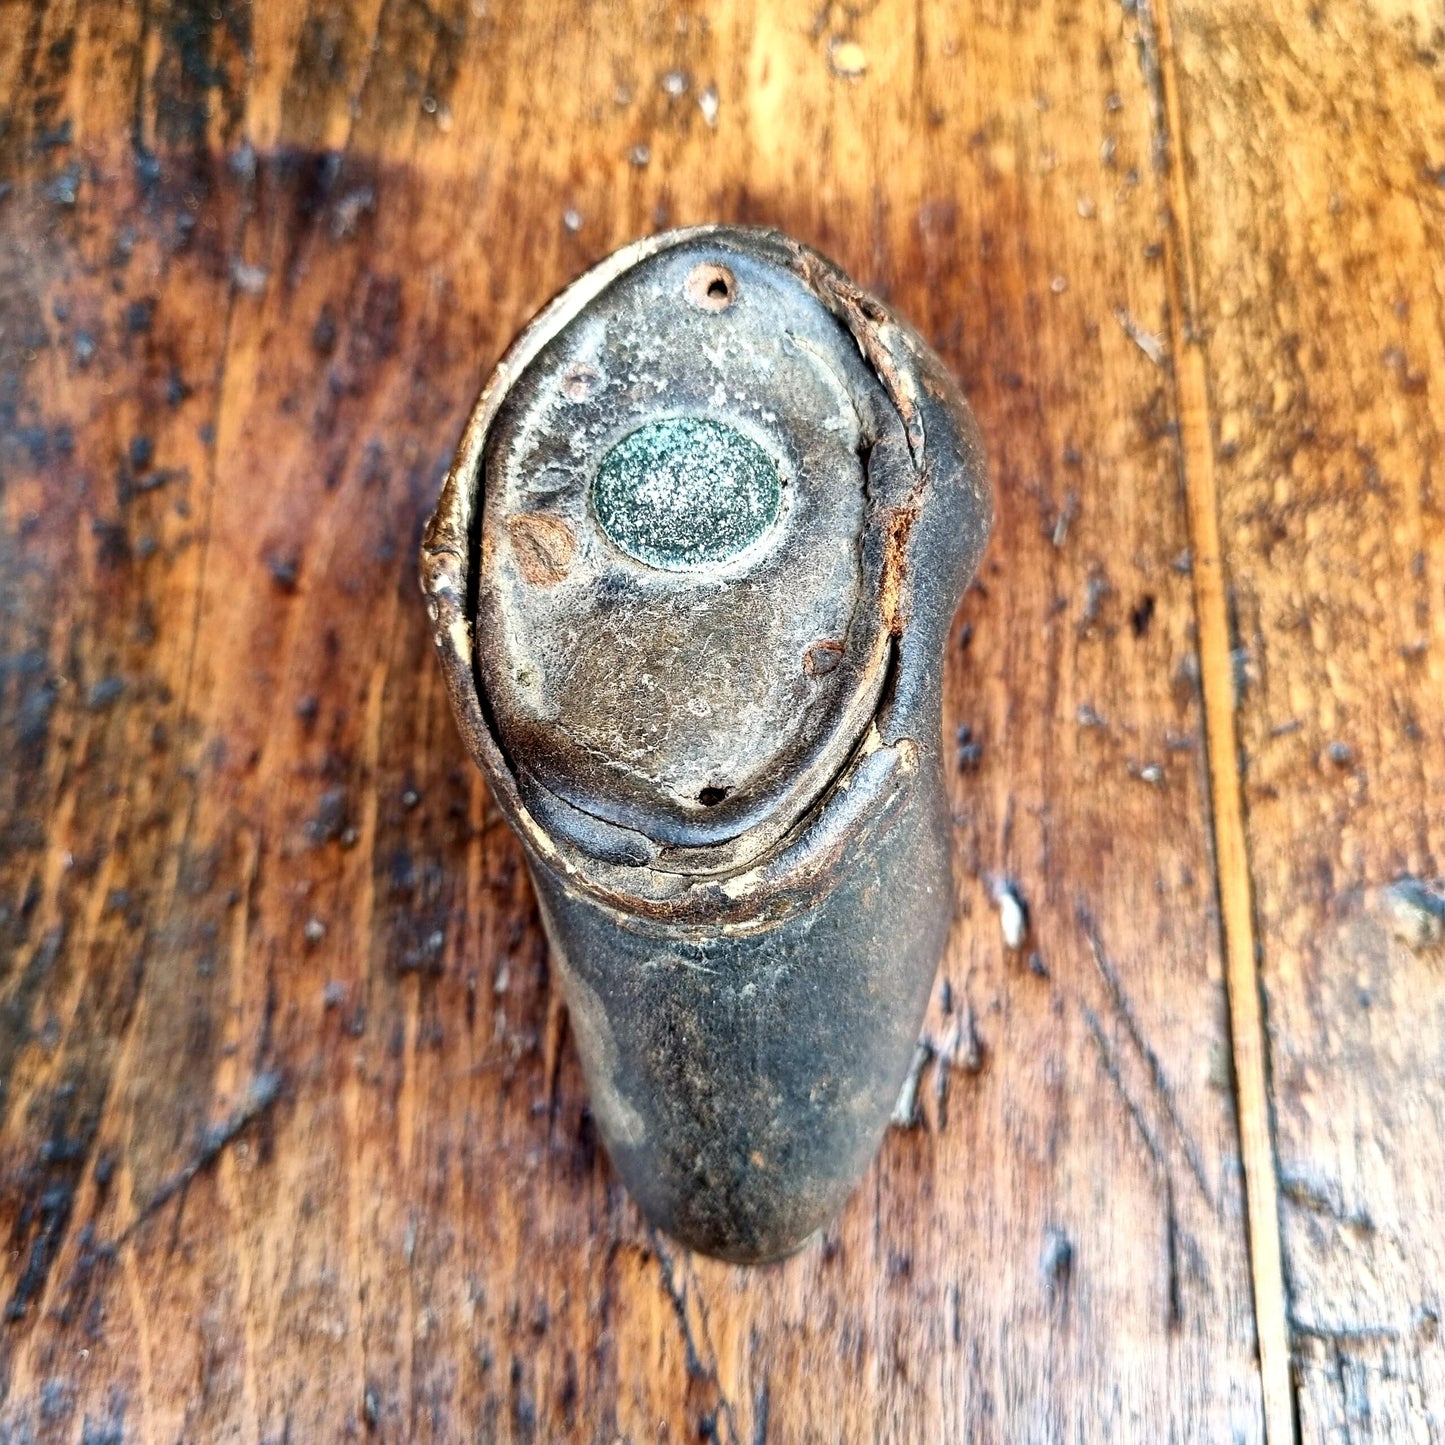 Rare 18th Century Antique Tobacco Snuff Box in the Form of a Leather Shoe